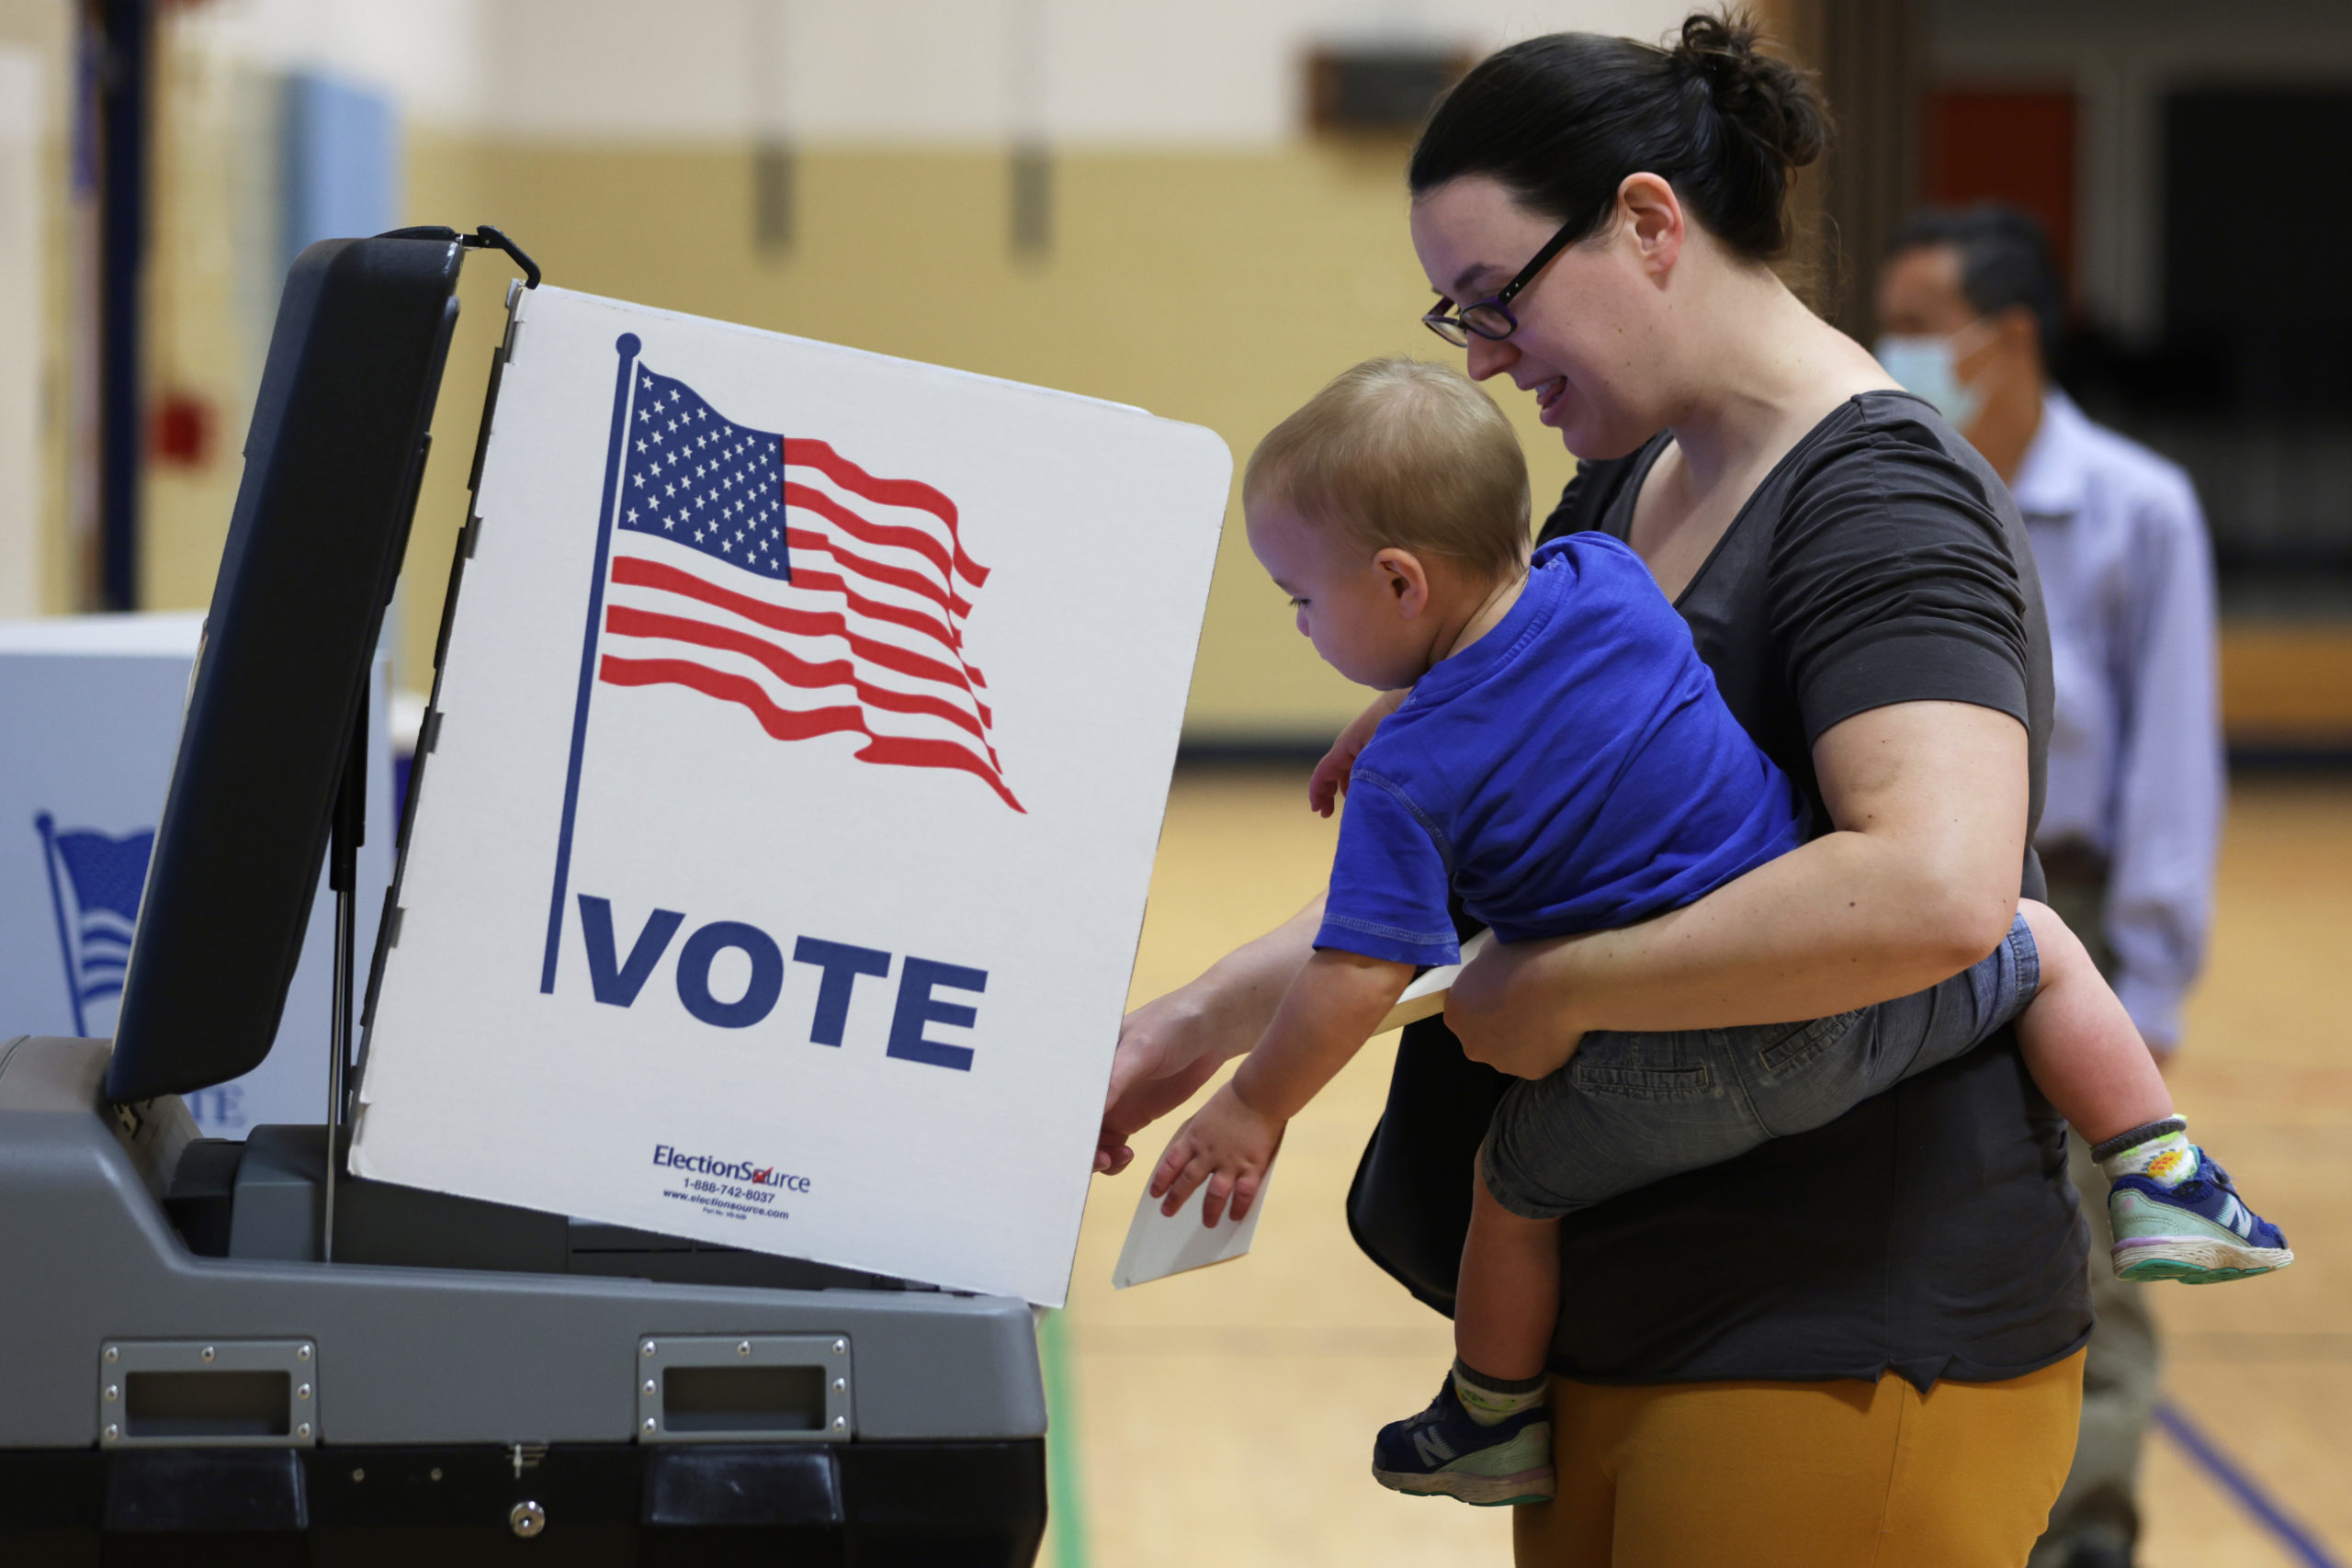 ALEXANDRIA, VIRGINIA - JUNE 21: A voter casts her ballot with her child at a polling station at Rose Hill Elementary School during the midterm primary election on June 21, 2022 in Alexandria, Virginia. (Photo by Alex Wong/Getty Images)